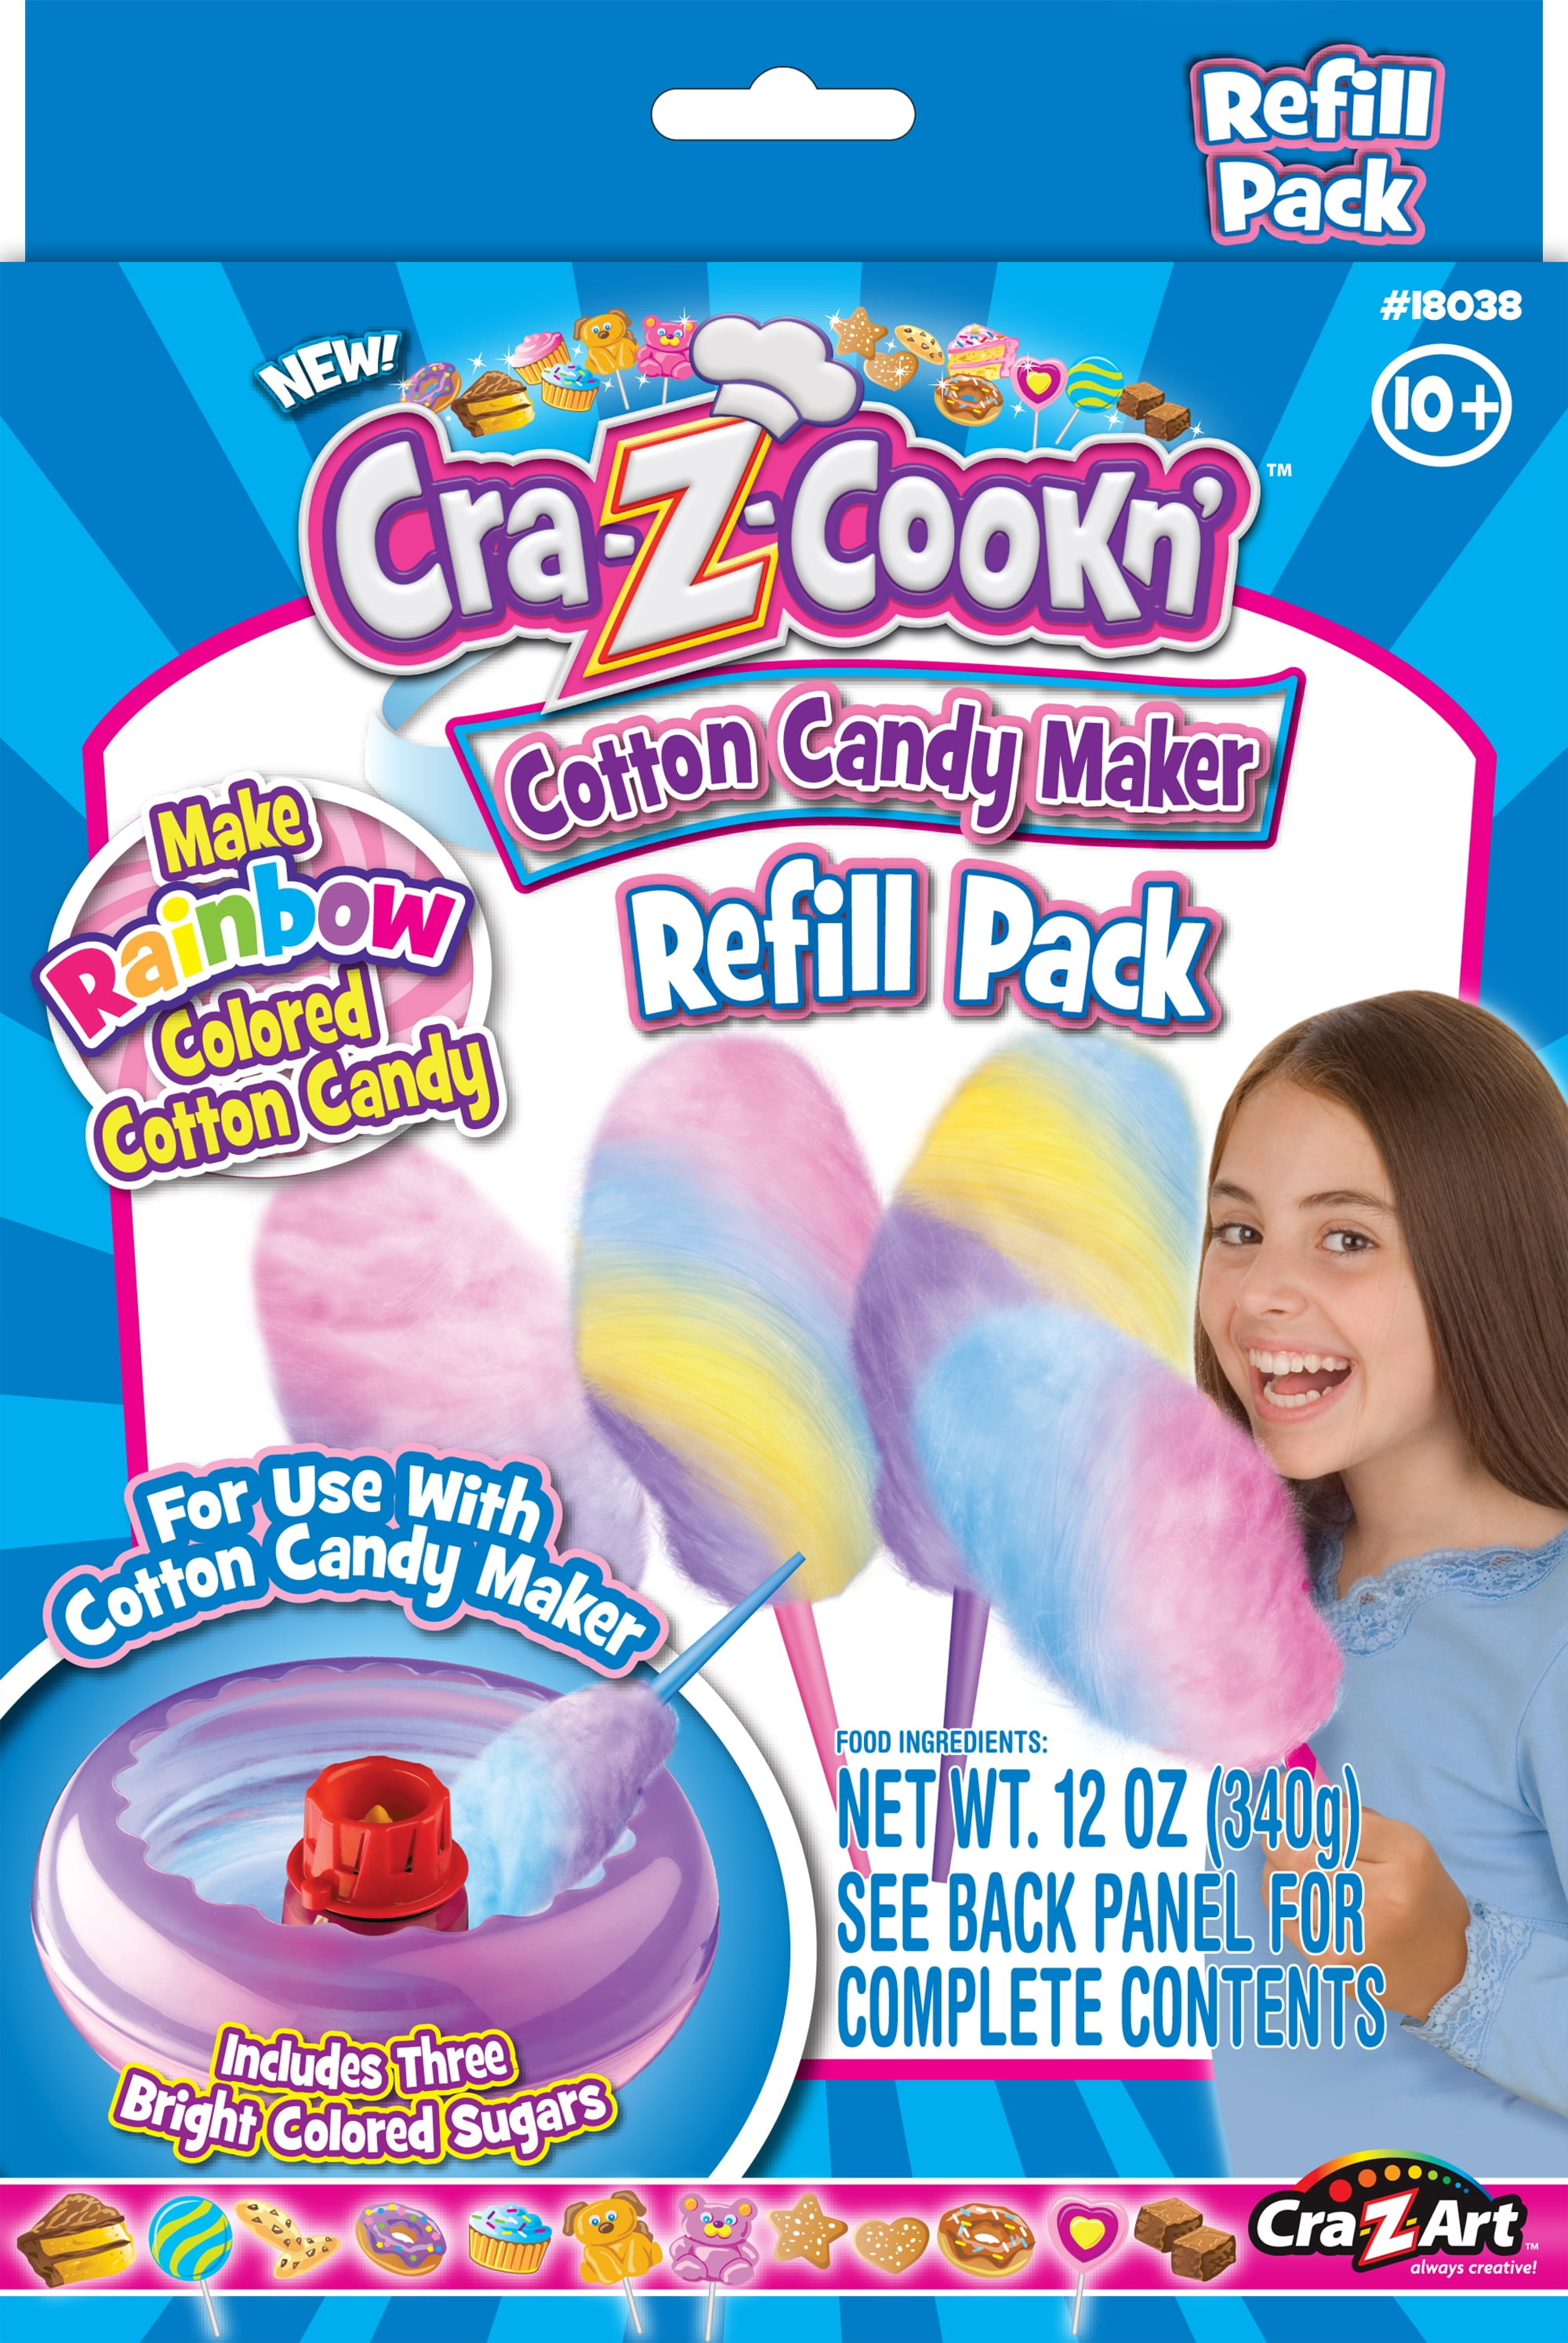 Cra-Z-Cookn Cotton Candy Maker Refill Pack.